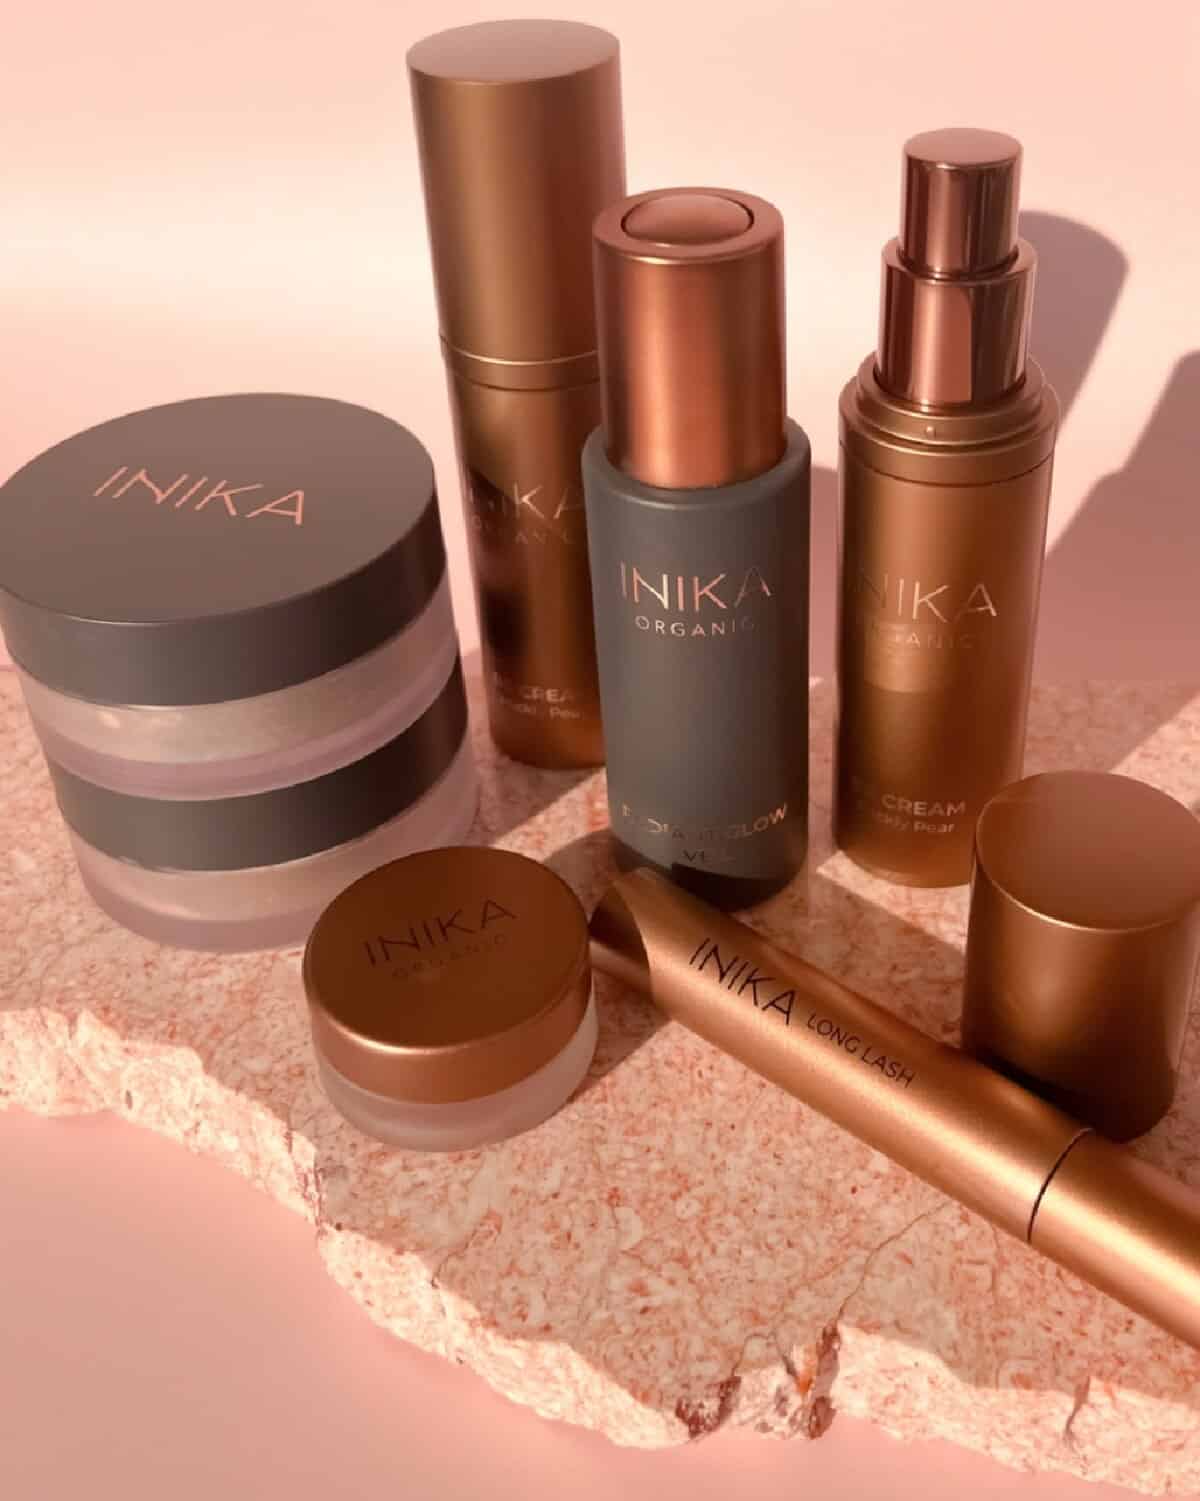 A collection of copper colored bottles and containers from the Inika Organic line of make up products displayed on a rose pink background on top of a pink-colored stone slab.